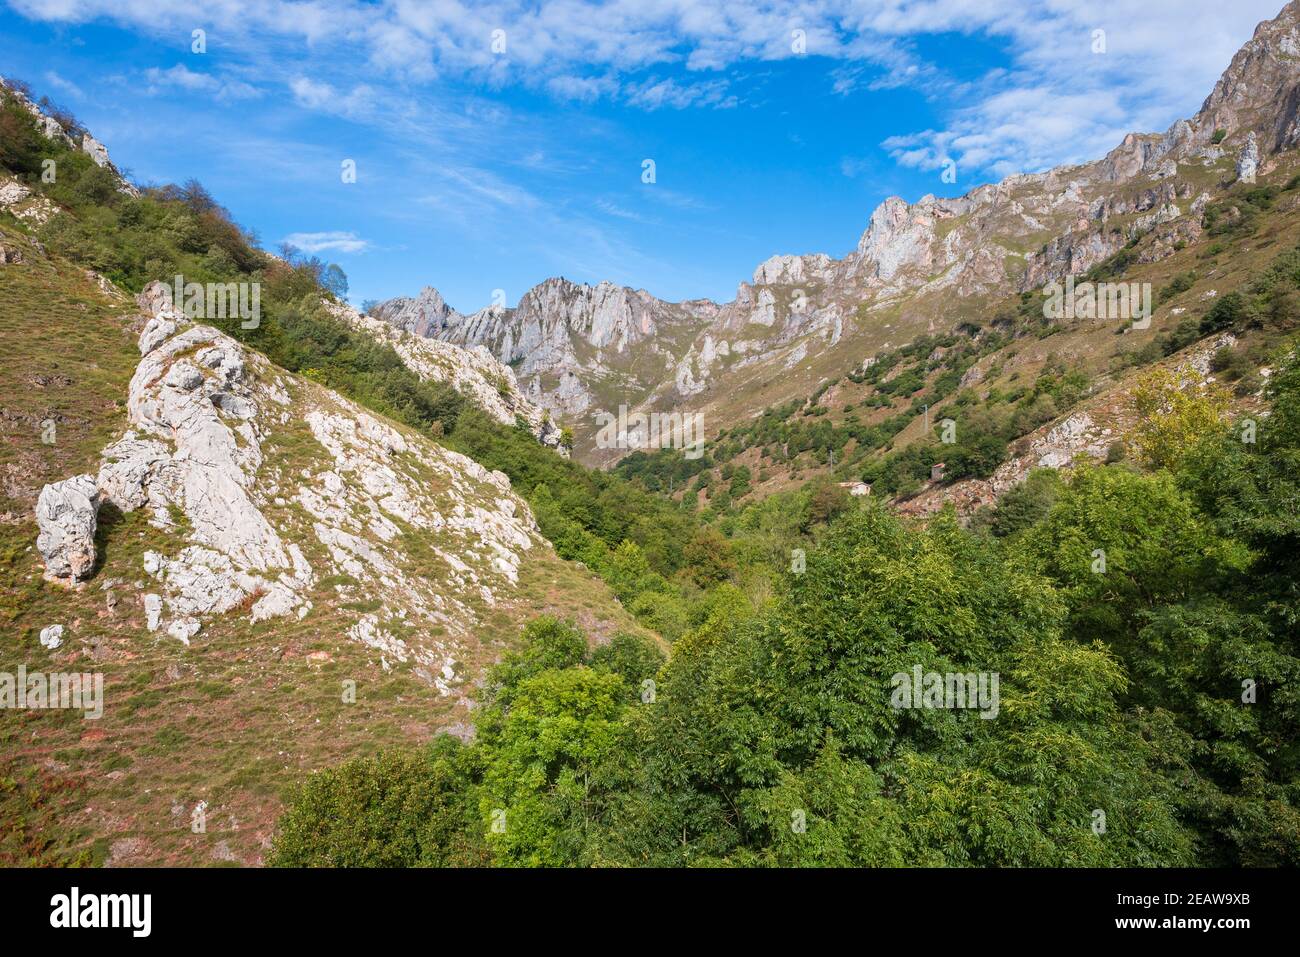 The national Park and mountain range Los Picos de Europa in Spain Stock Photo